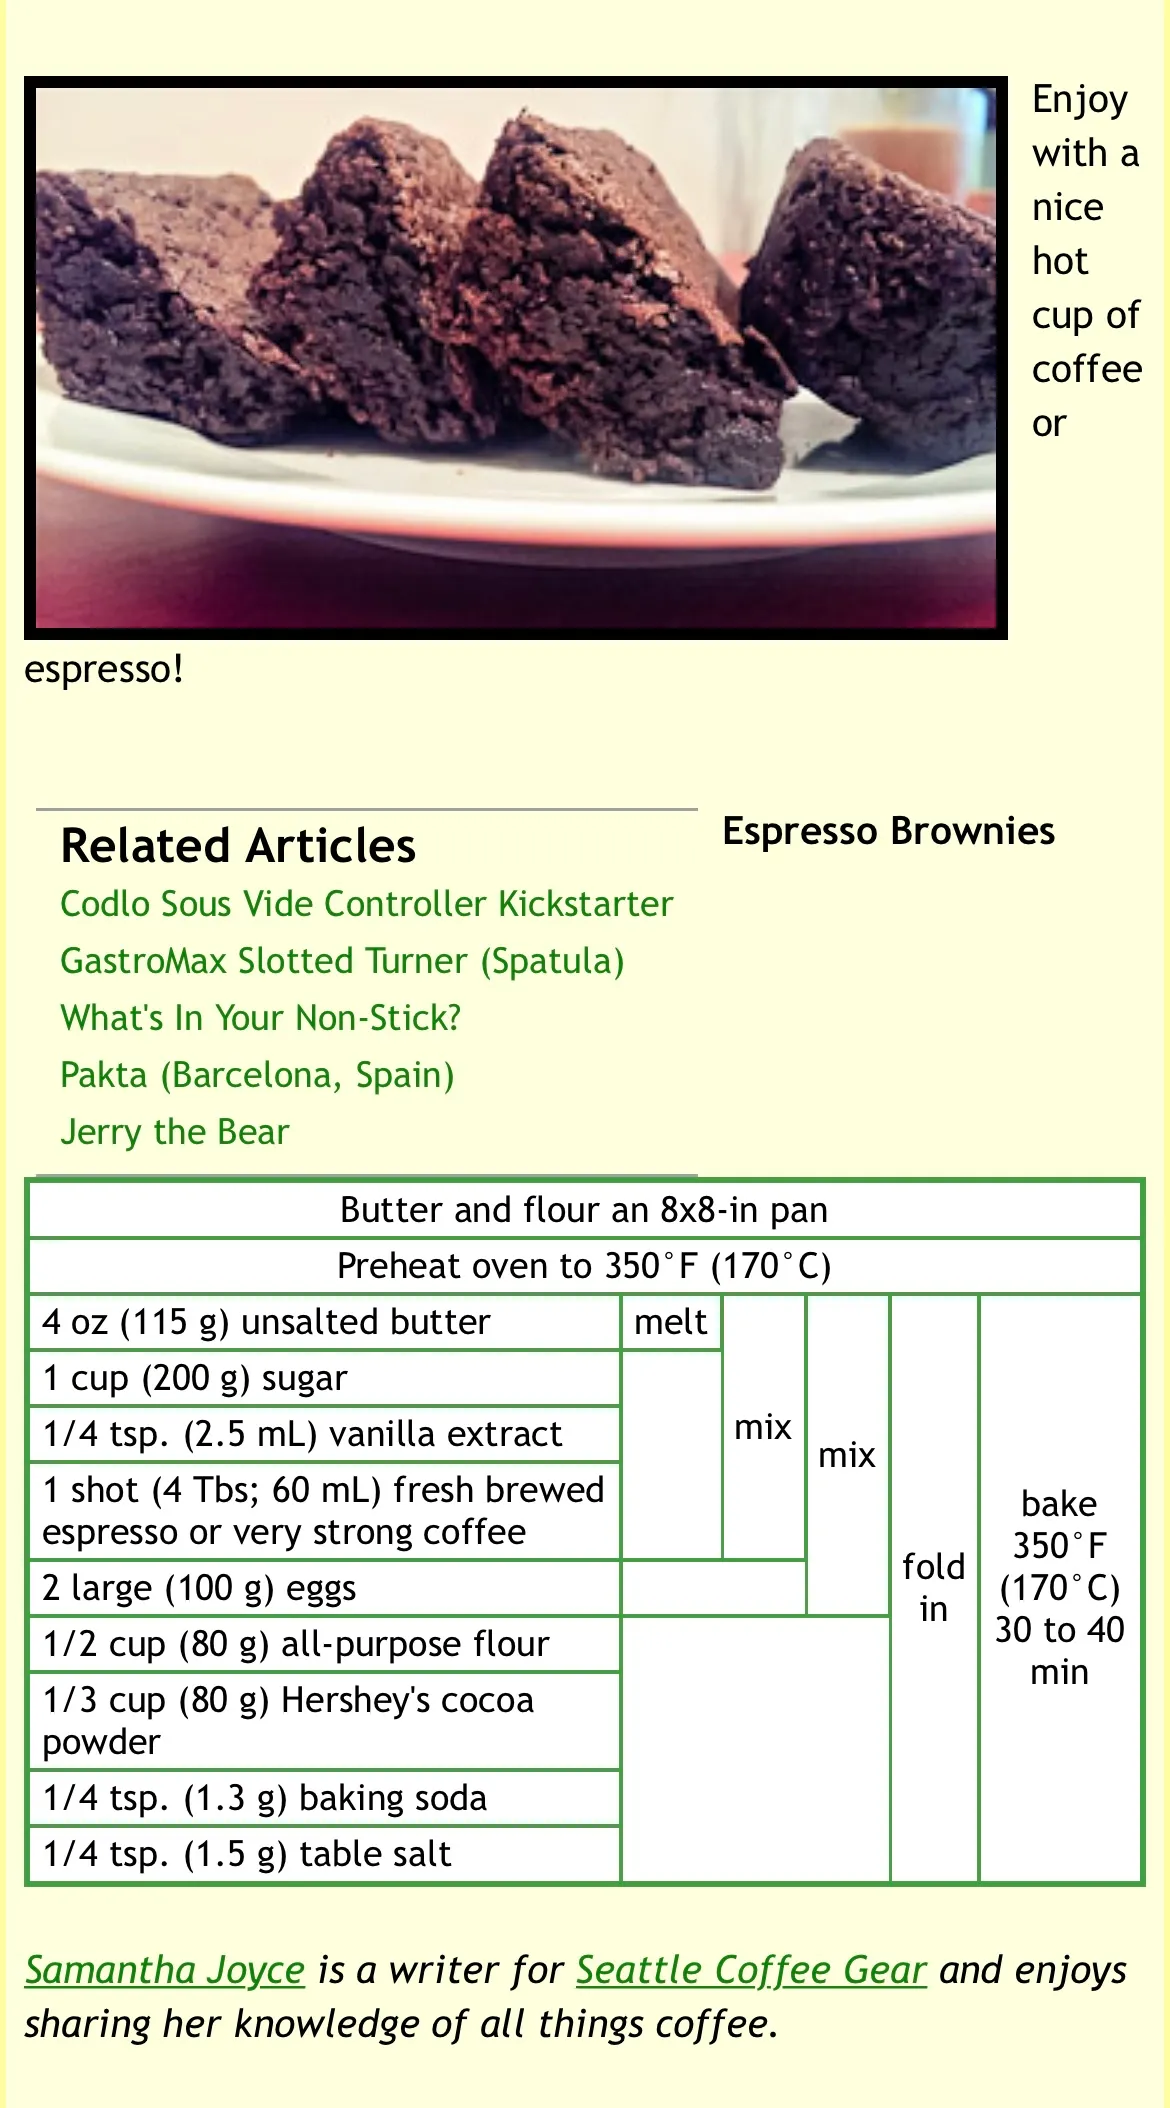 Screenshot of a recipe from the website cooking for engineers